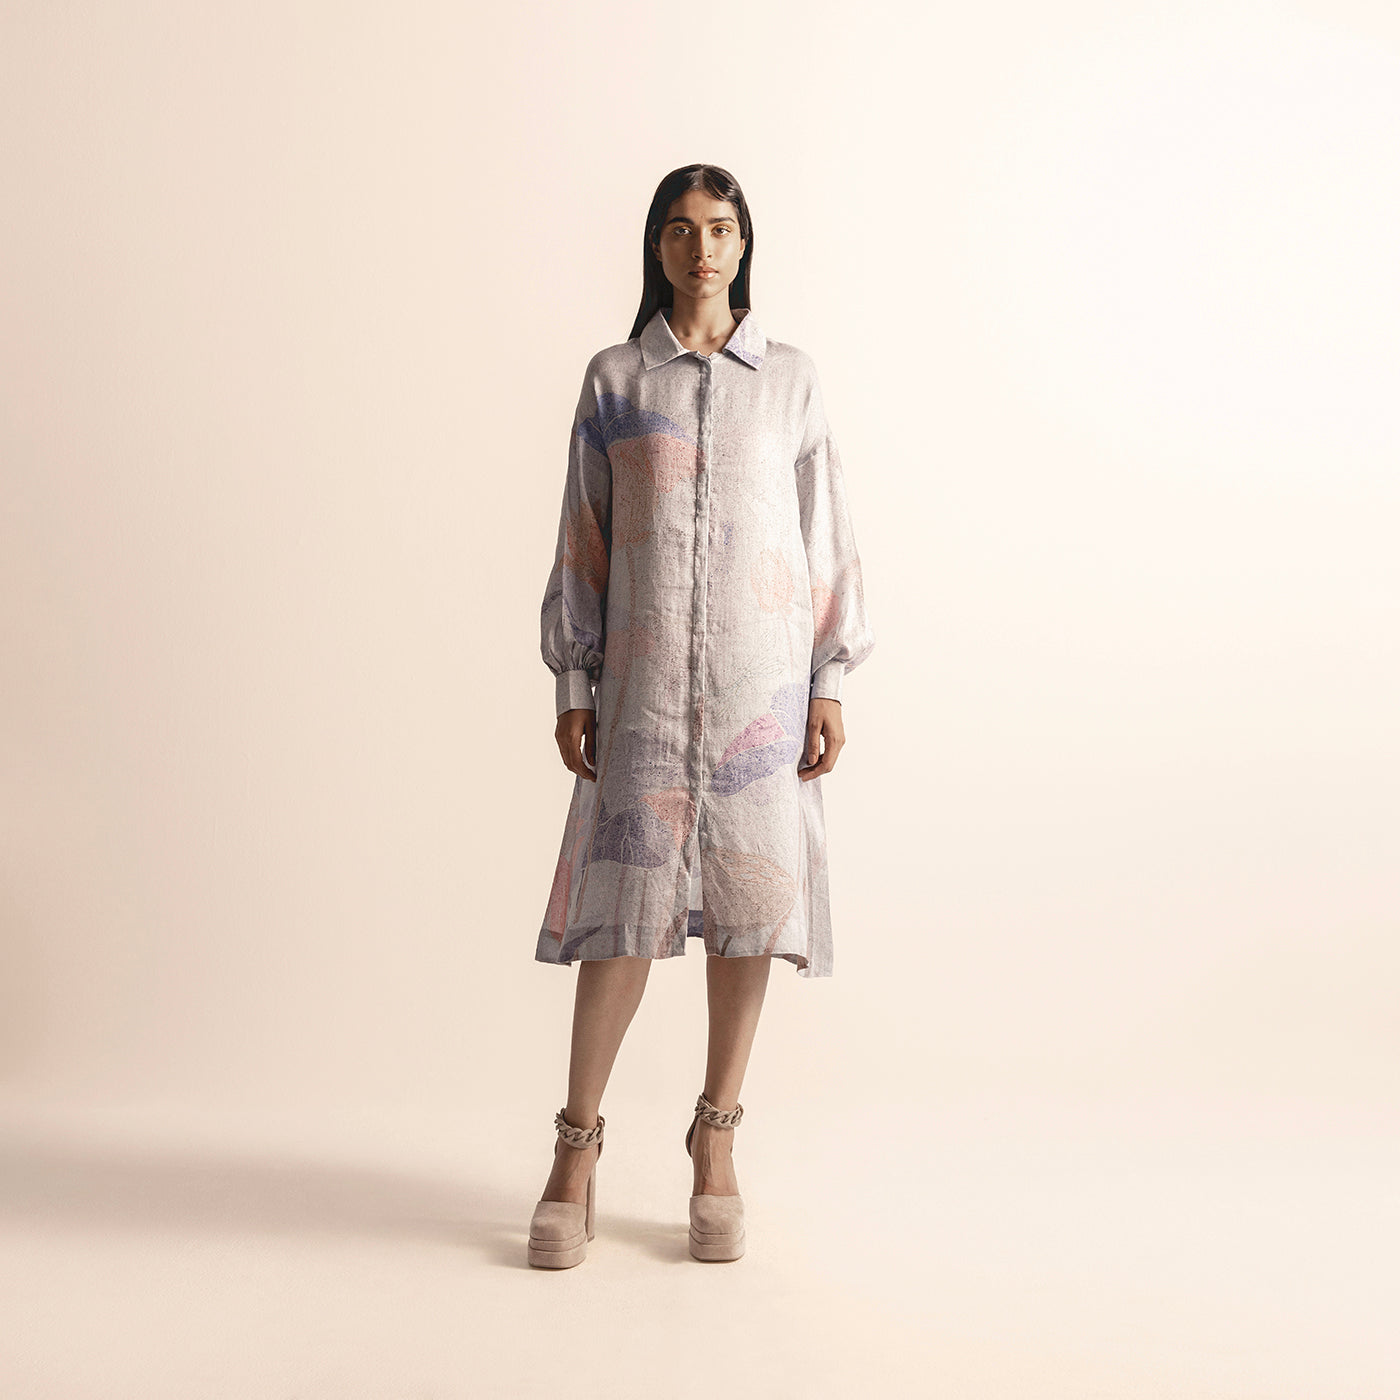 LOTUS POND GRAPHIC PRINTED A-LINE SHIRT DRESS WITH BISHOP SLEEVES